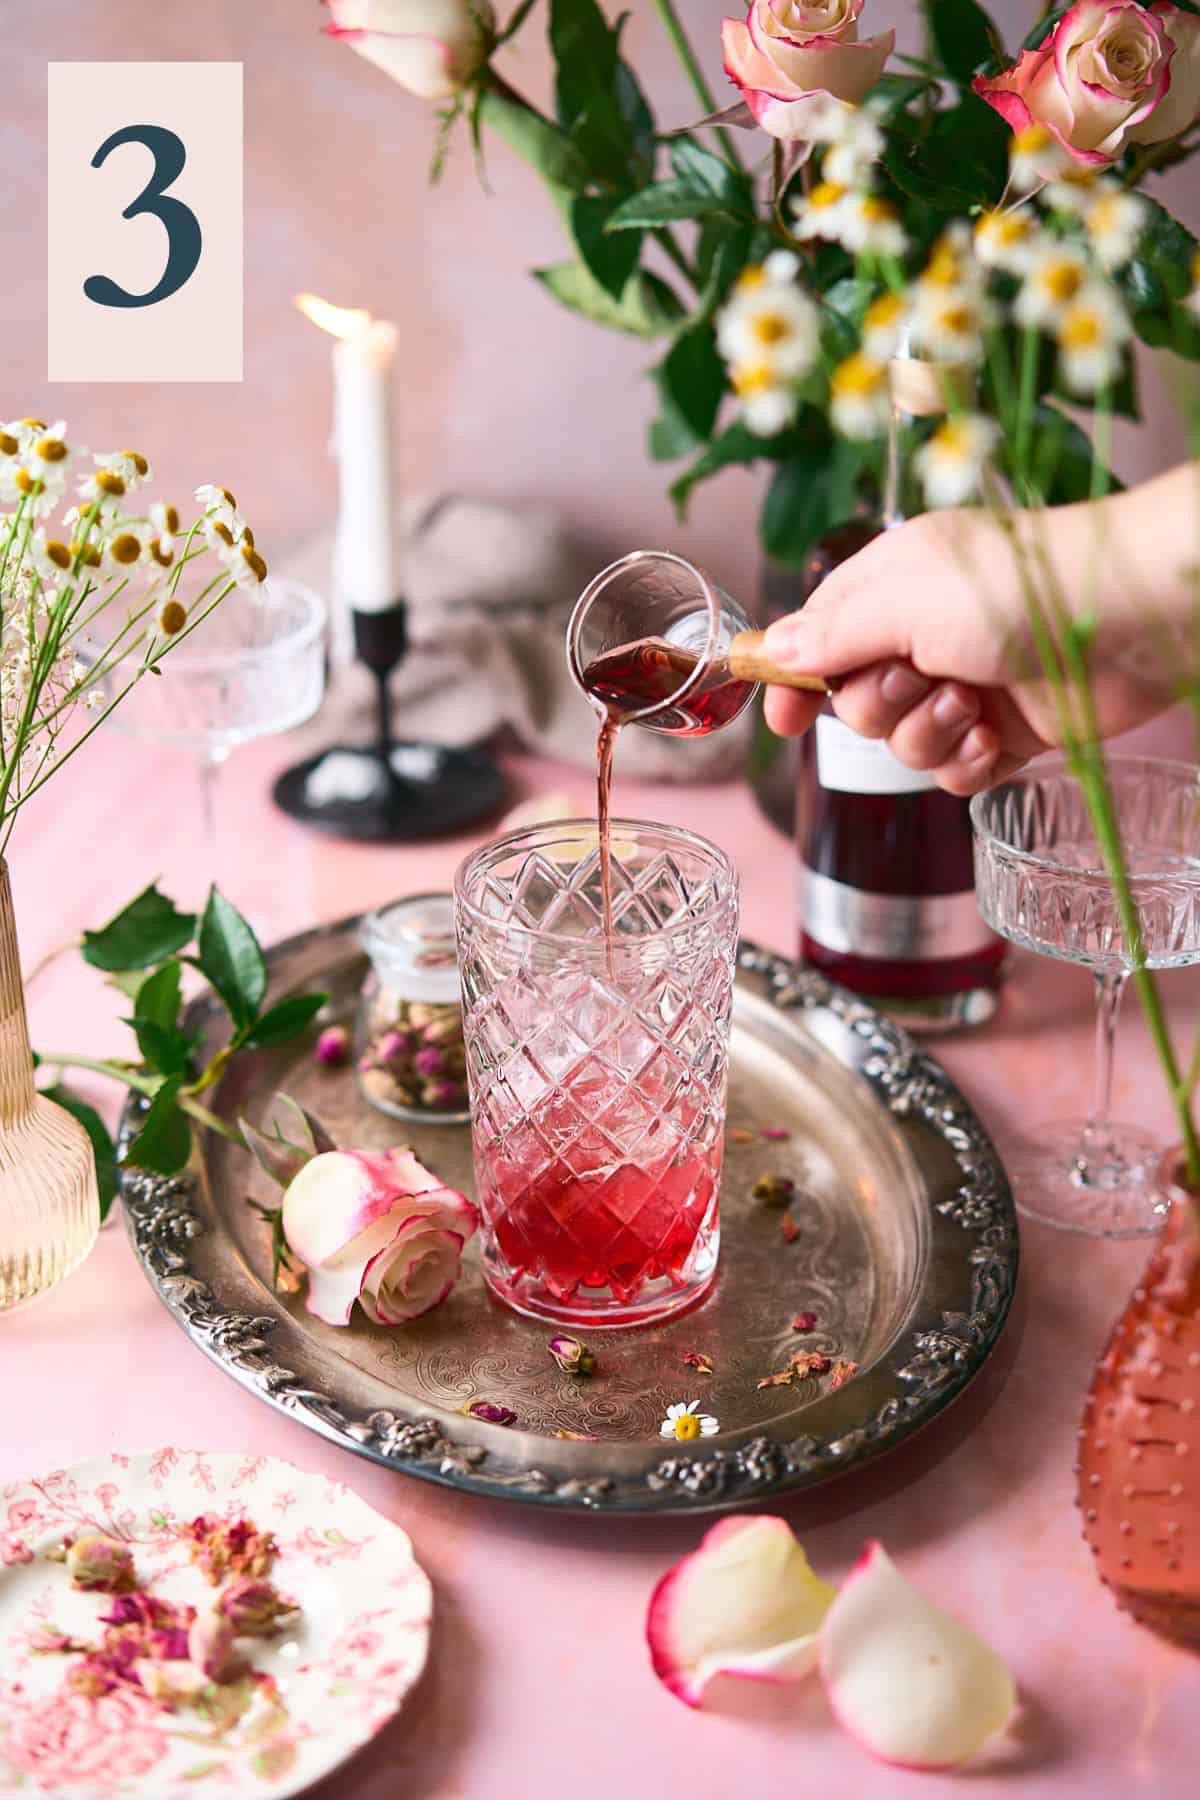 hand pouring raspberry liqueur into a beautiful glass cocktail shaker with an intricate romantic scene of fresh roses, candles and flowers surrounding it.